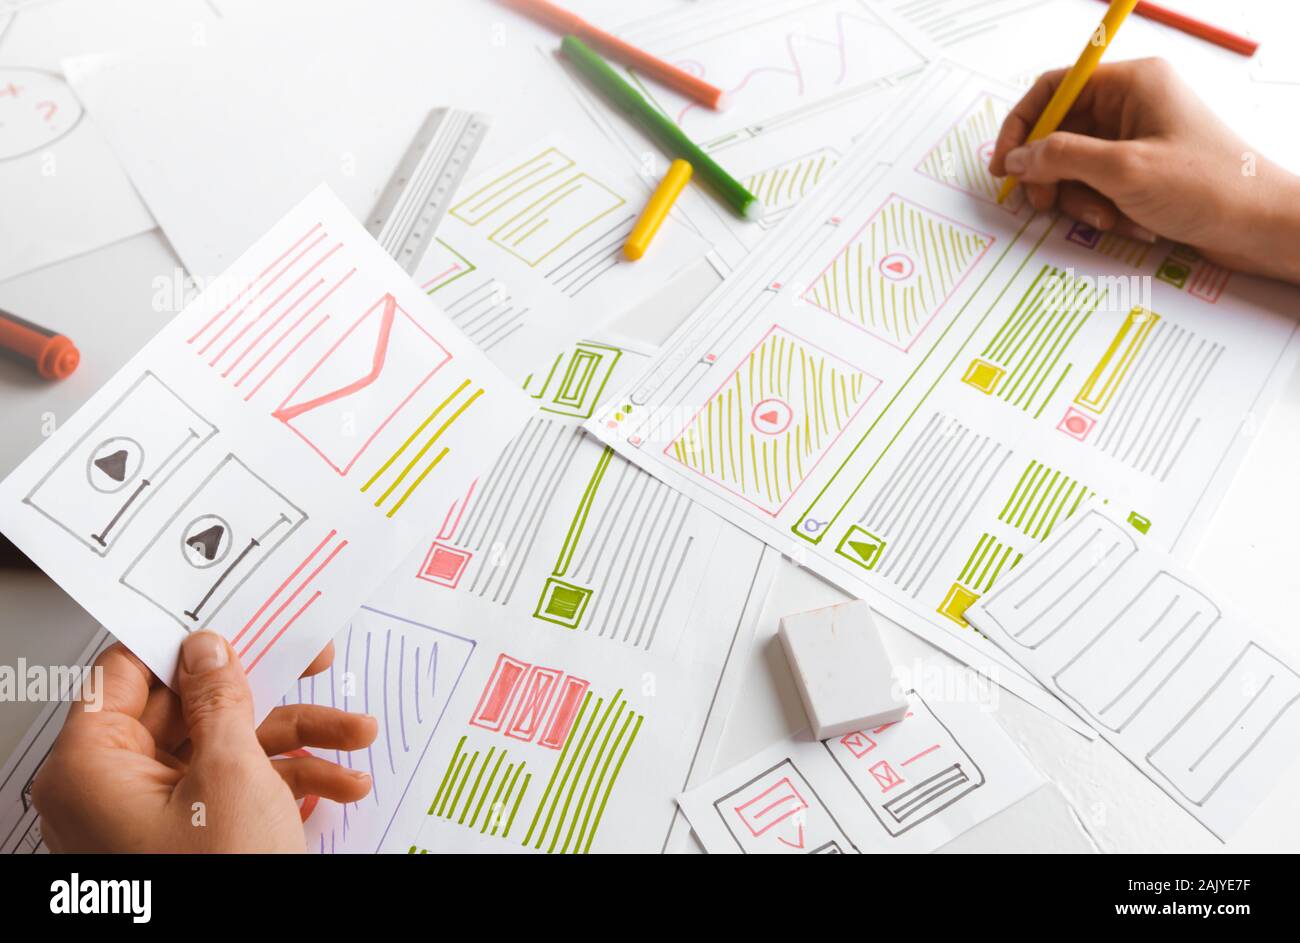 Design and creation of web sites. The designer draws application sketches. Stock Photo